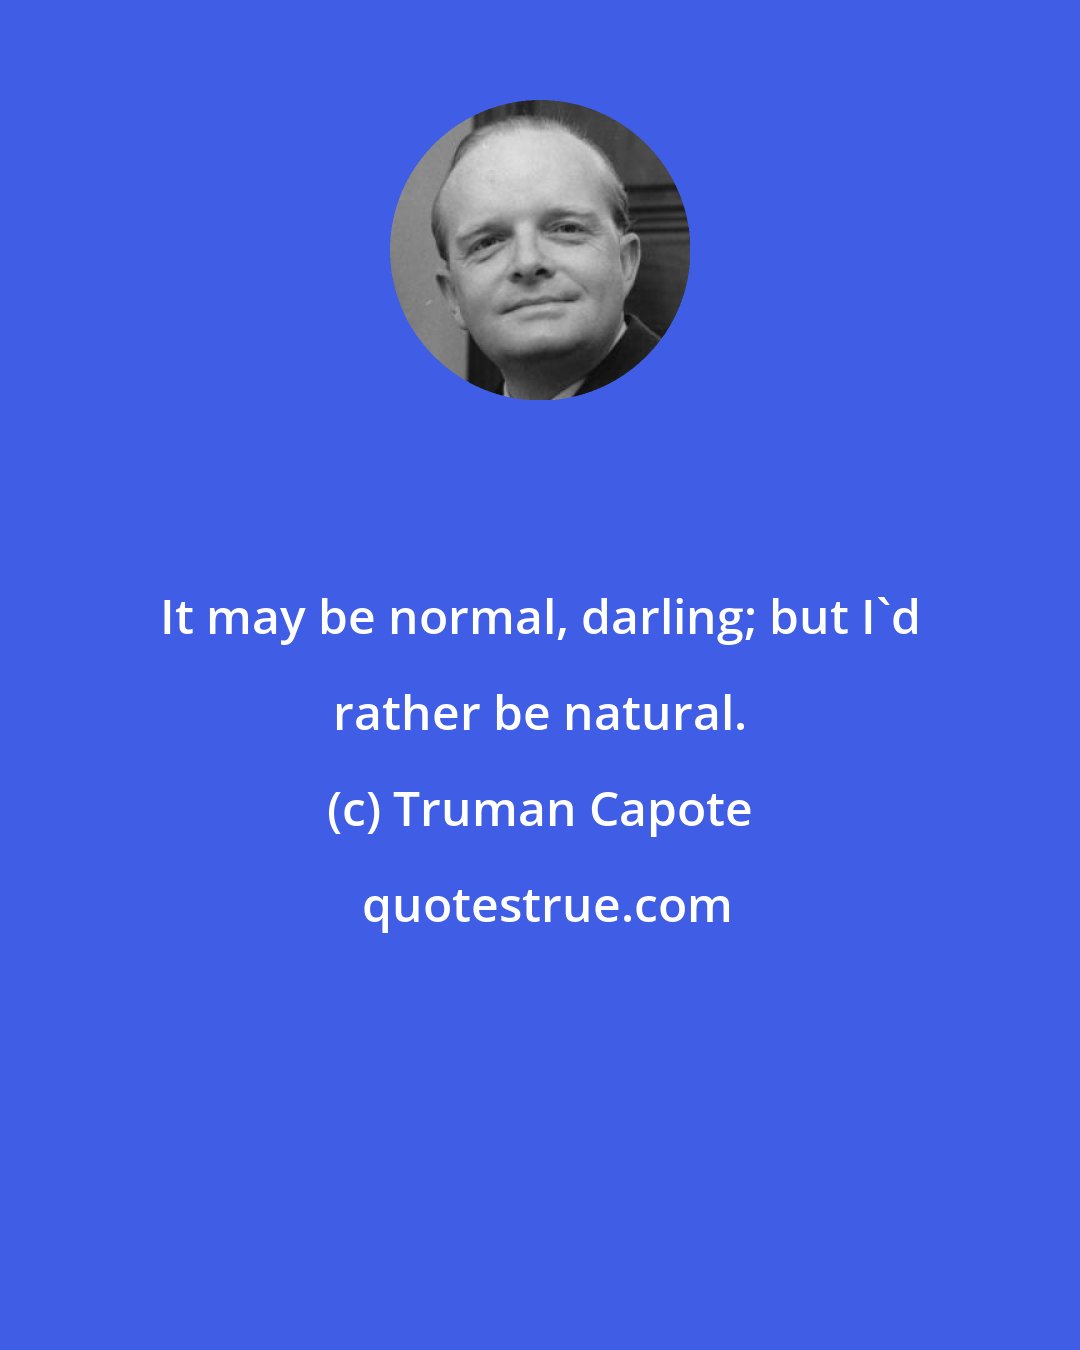 Truman Capote: It may be normal, darling; but I'd rather be natural.